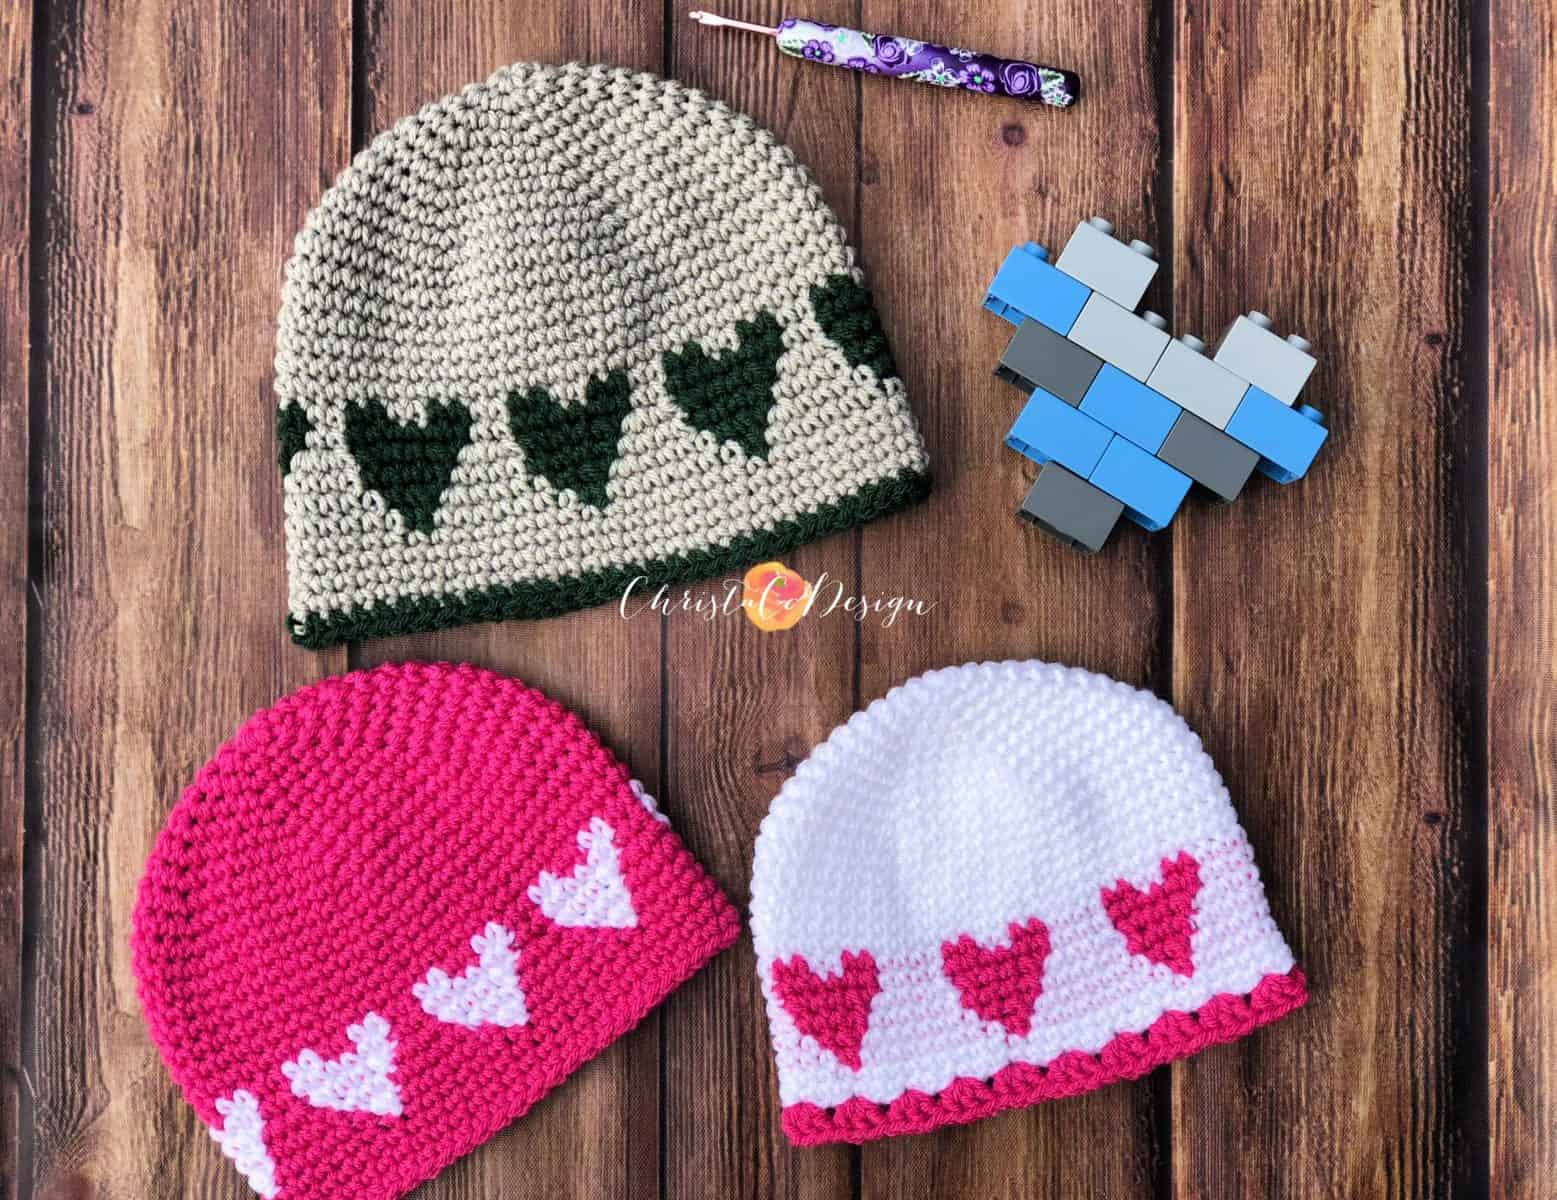 30+ Free Crochet Patterns Perfect for Valentine’s Day Gifts